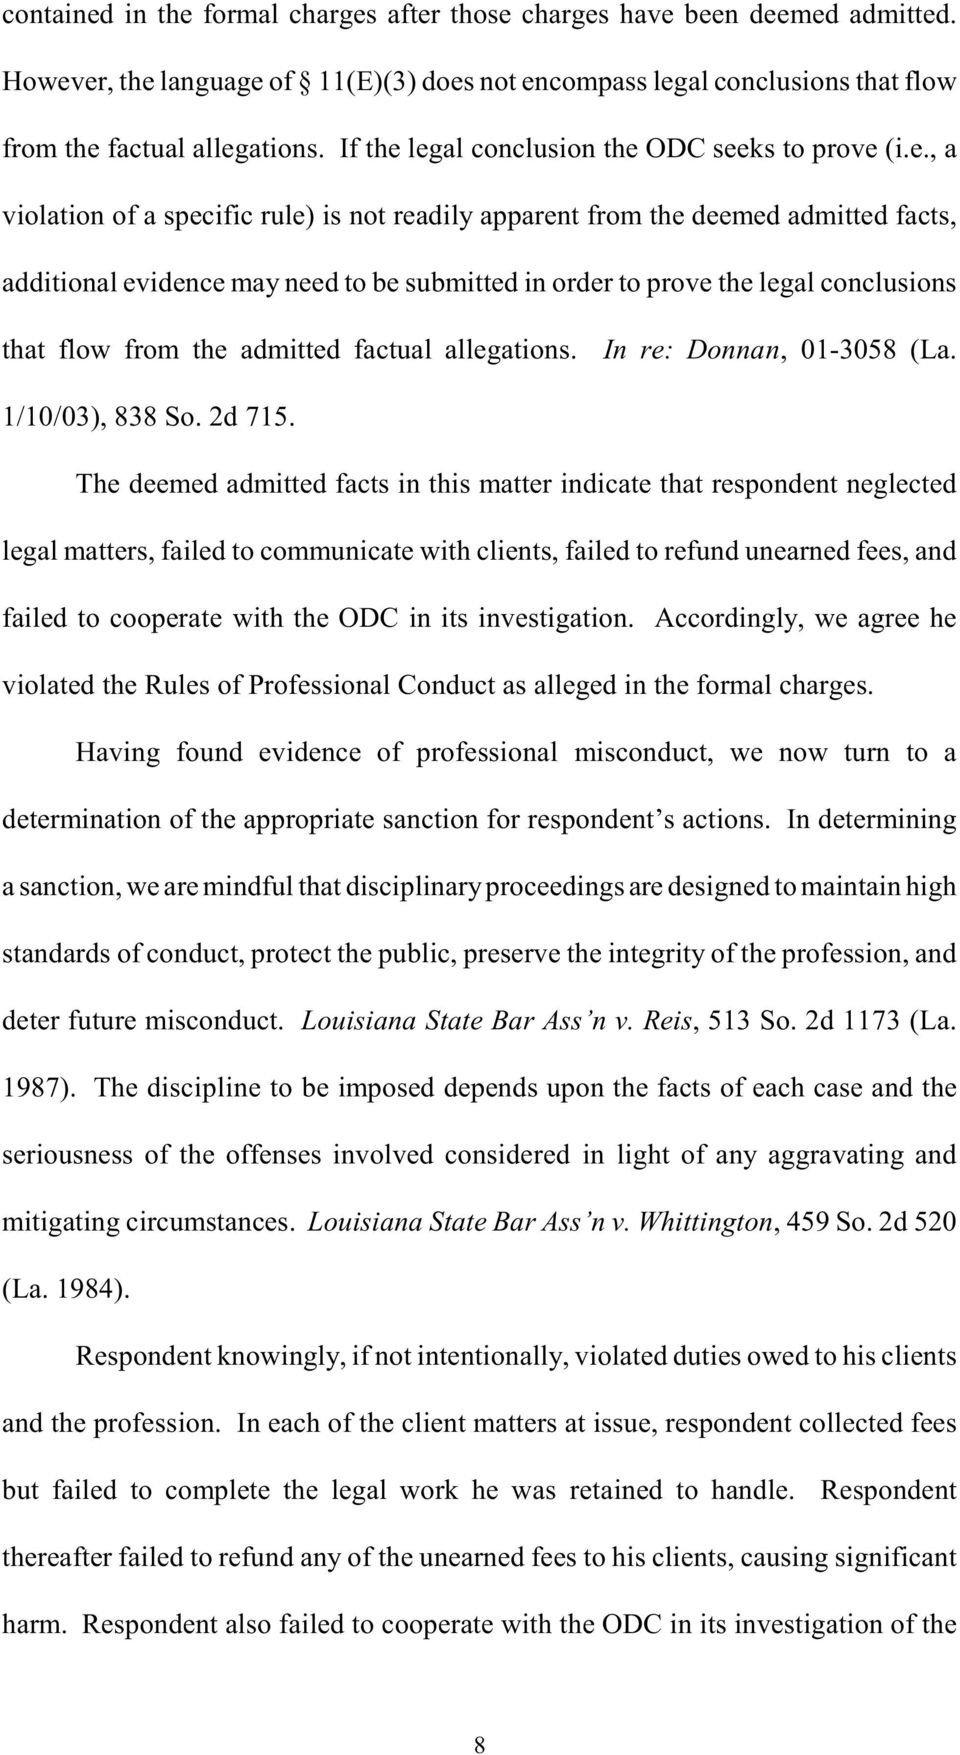 legal conclusion the ODC seeks to prove (i.e., a violation of a specific rule) is not readily apparent from the deemed admitted facts, additional evidence may need to be submitted in order to prove